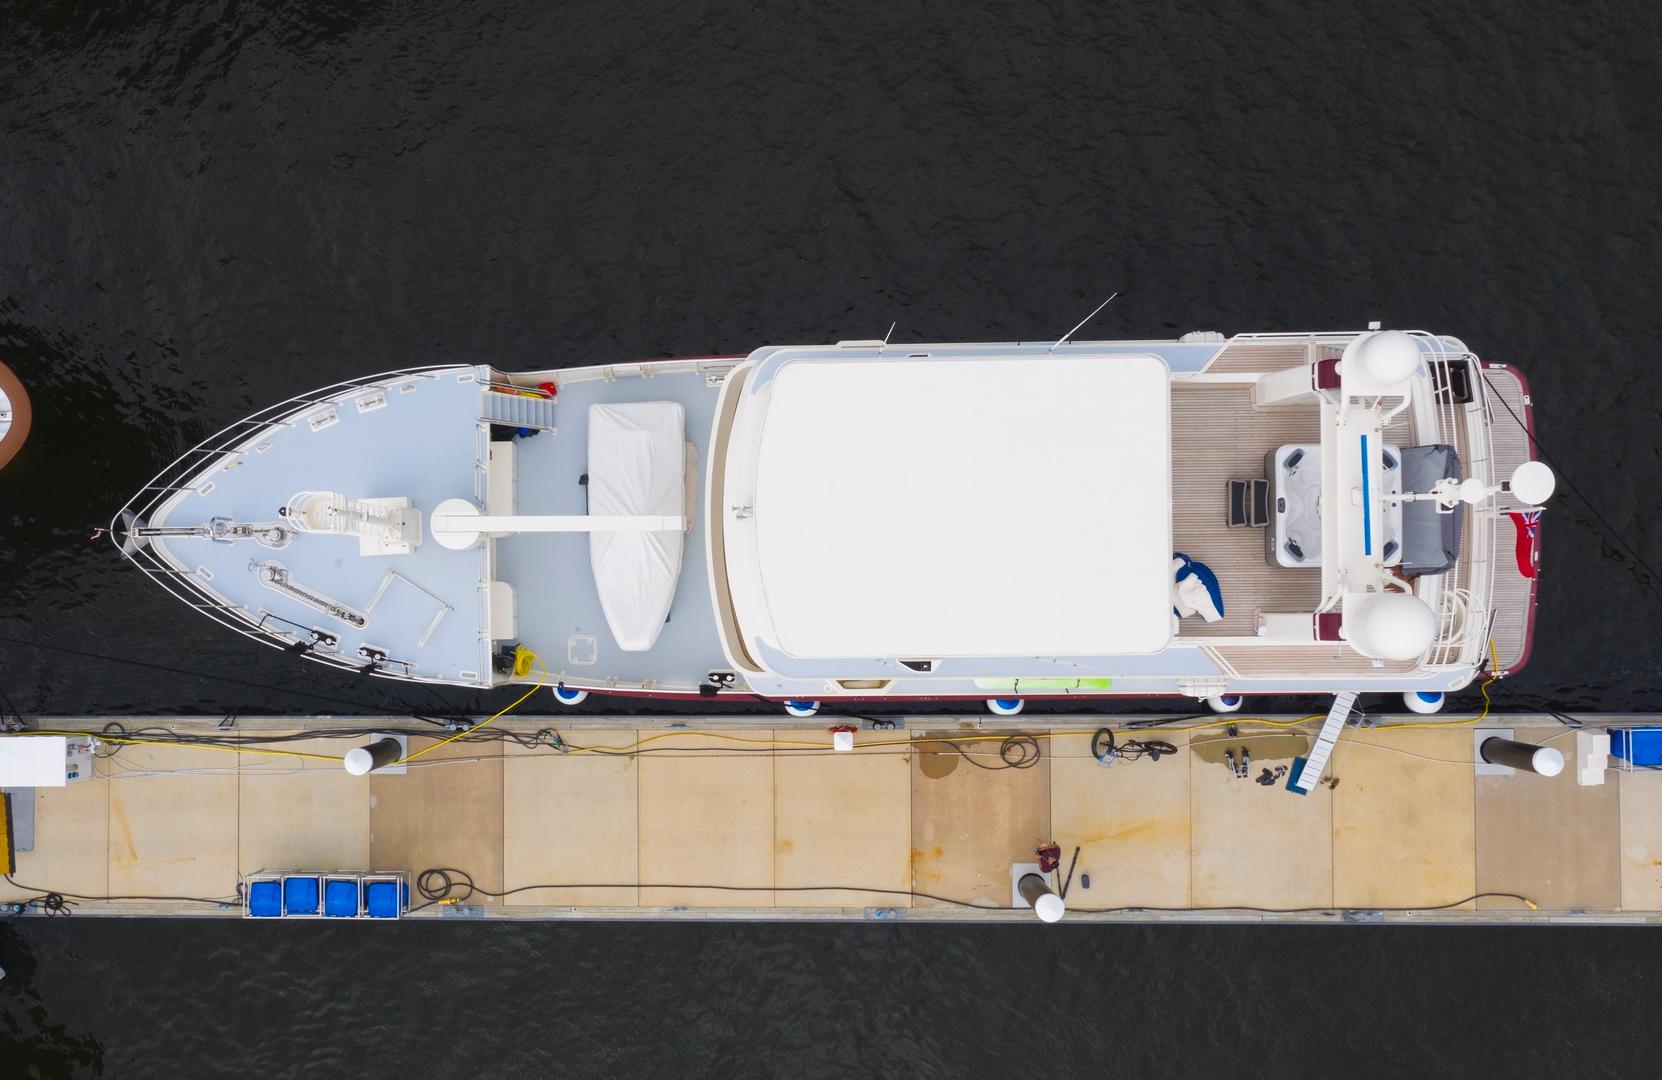 AB Normal 98'10 Inace - Profile, Explorer Yacht, Long range Explorer, Trawler, Expedition Yacht seen from above